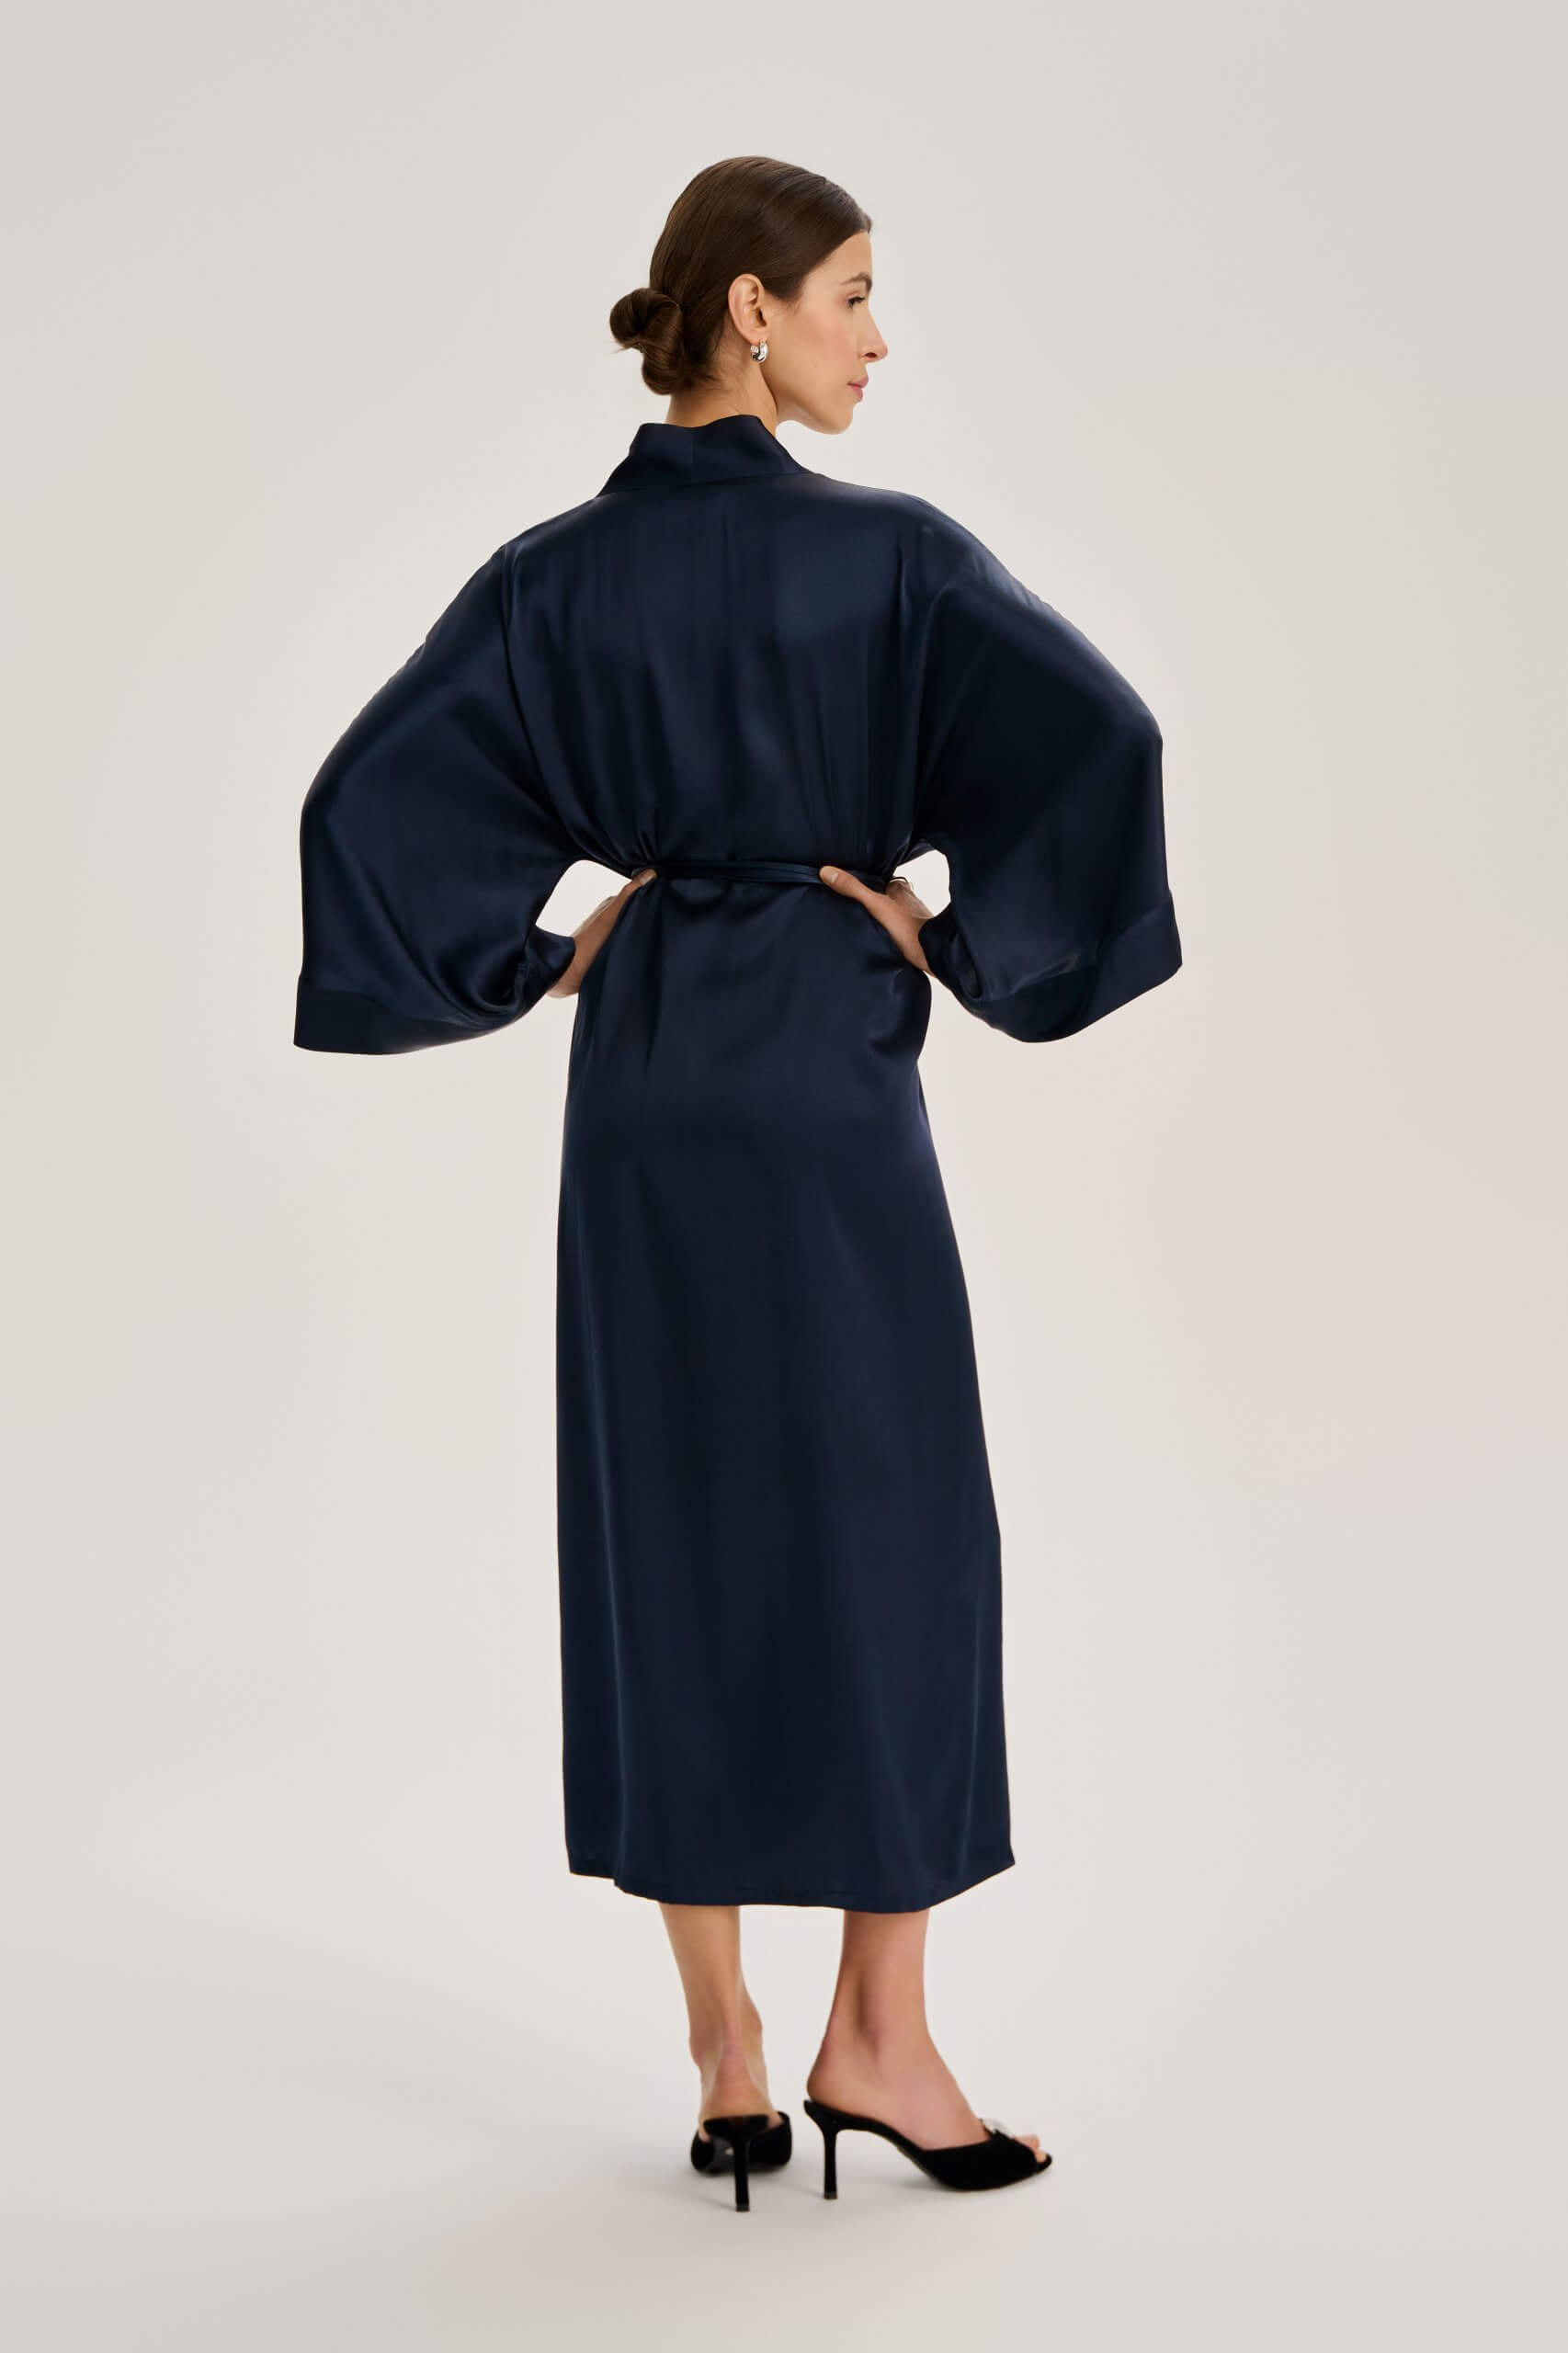 SILK KIMONO DRESS FROM THE MOON COLLECTION